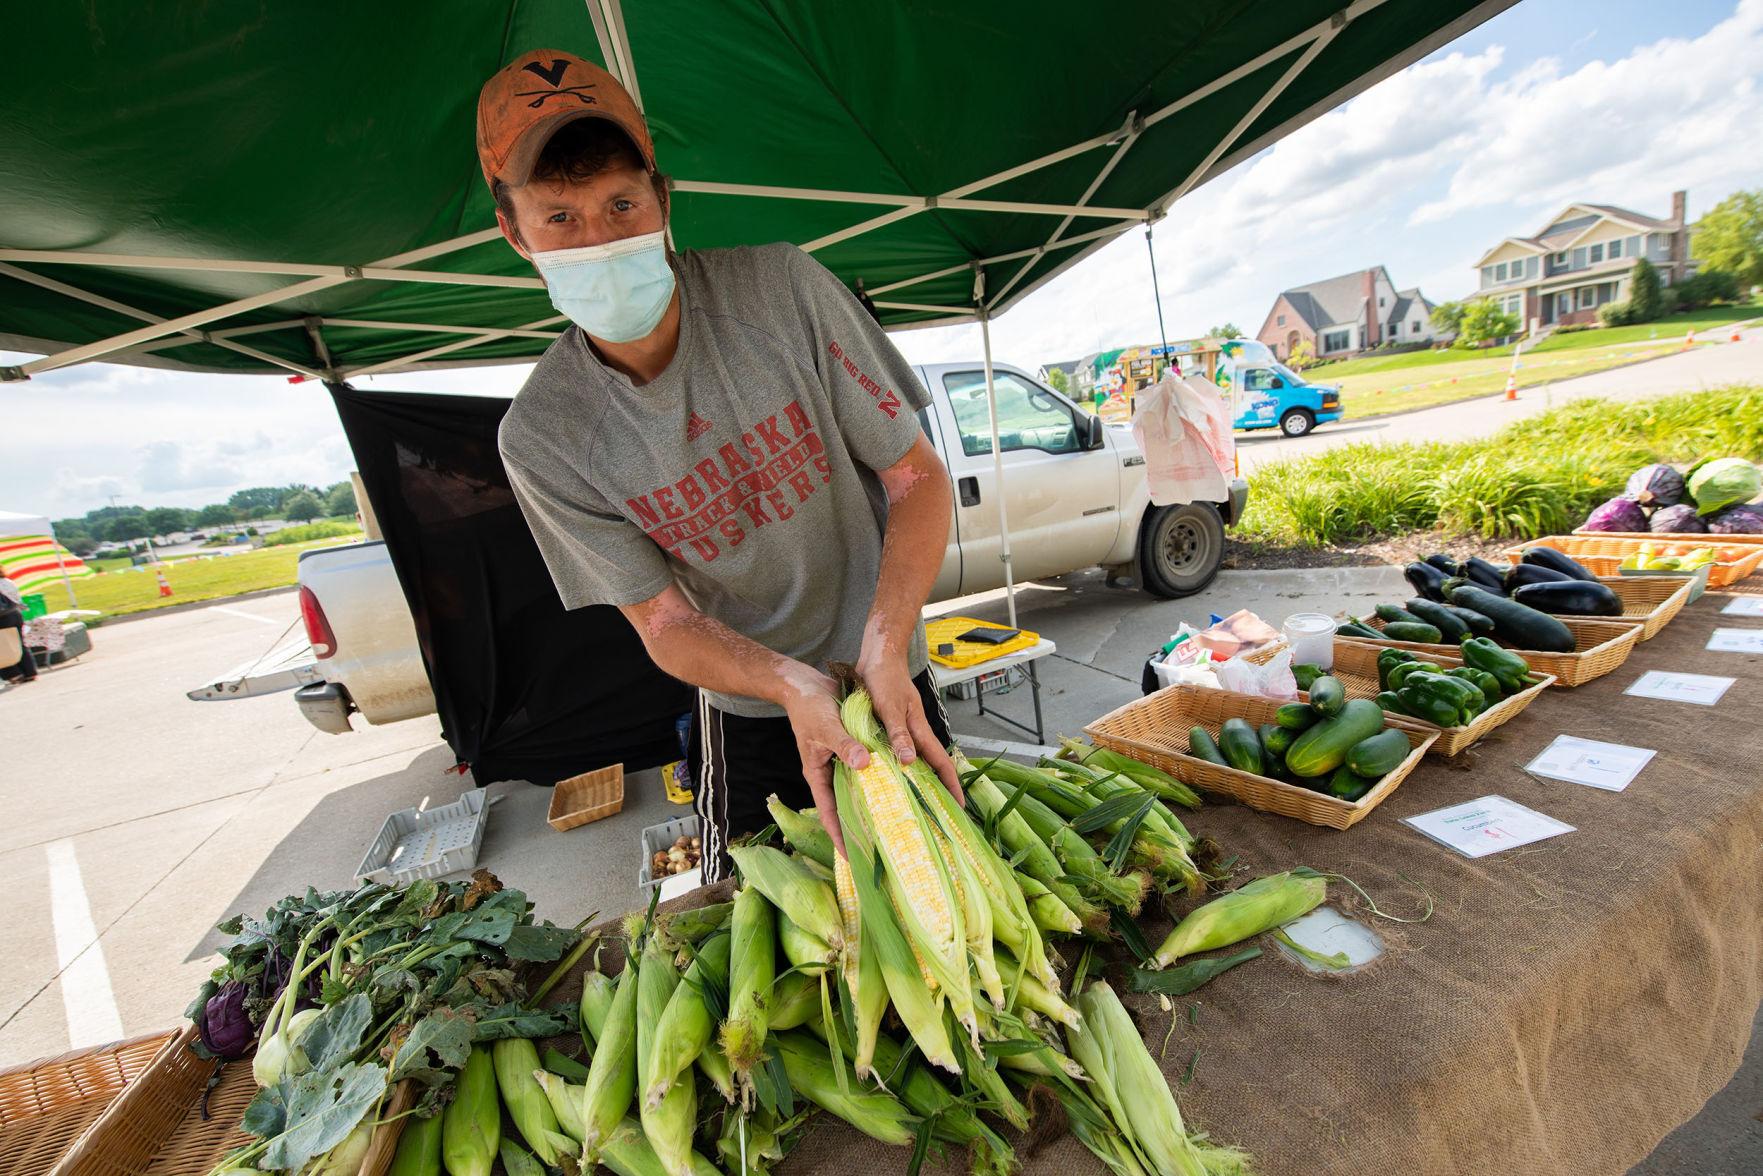 Inaugural East Campus Discovery Days and Farmer's Market kicks off June 12